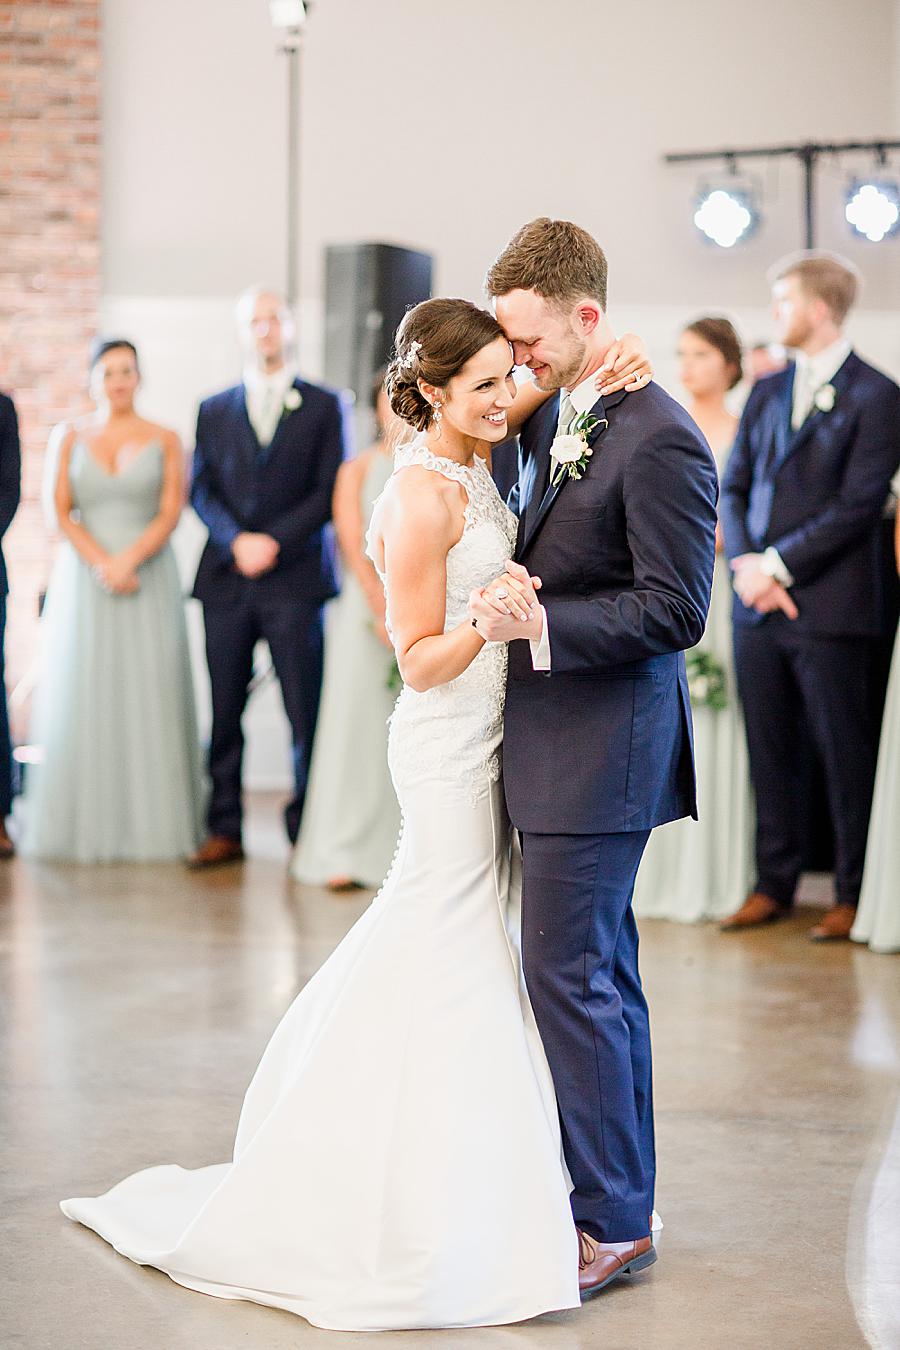 Dance floor at this pavilion wedding by Knoxville Wedding Photographer, Amanda May Photos.